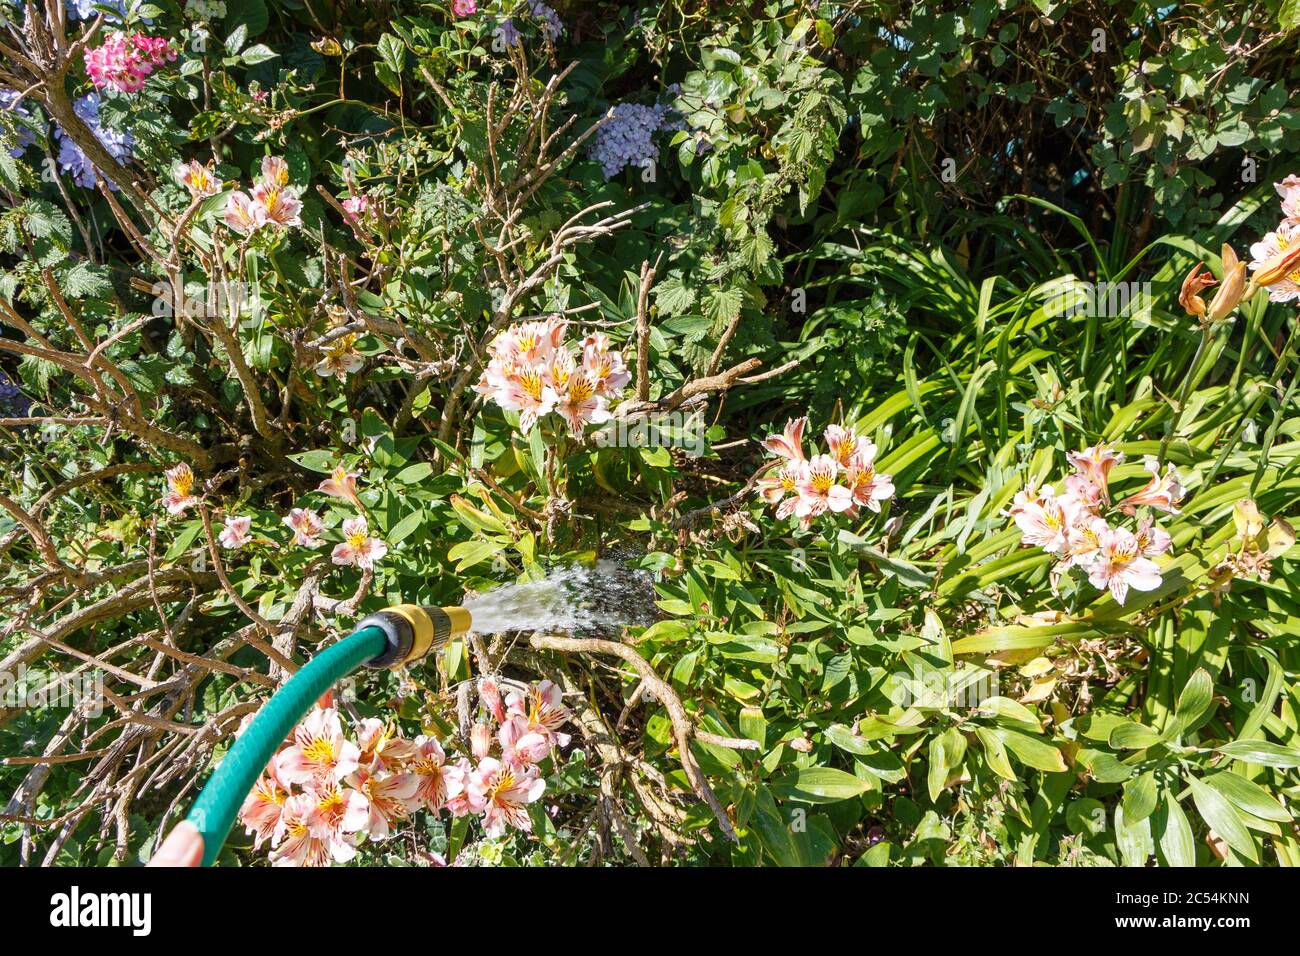 Watering plants with a garden hose during summer Stock Photo